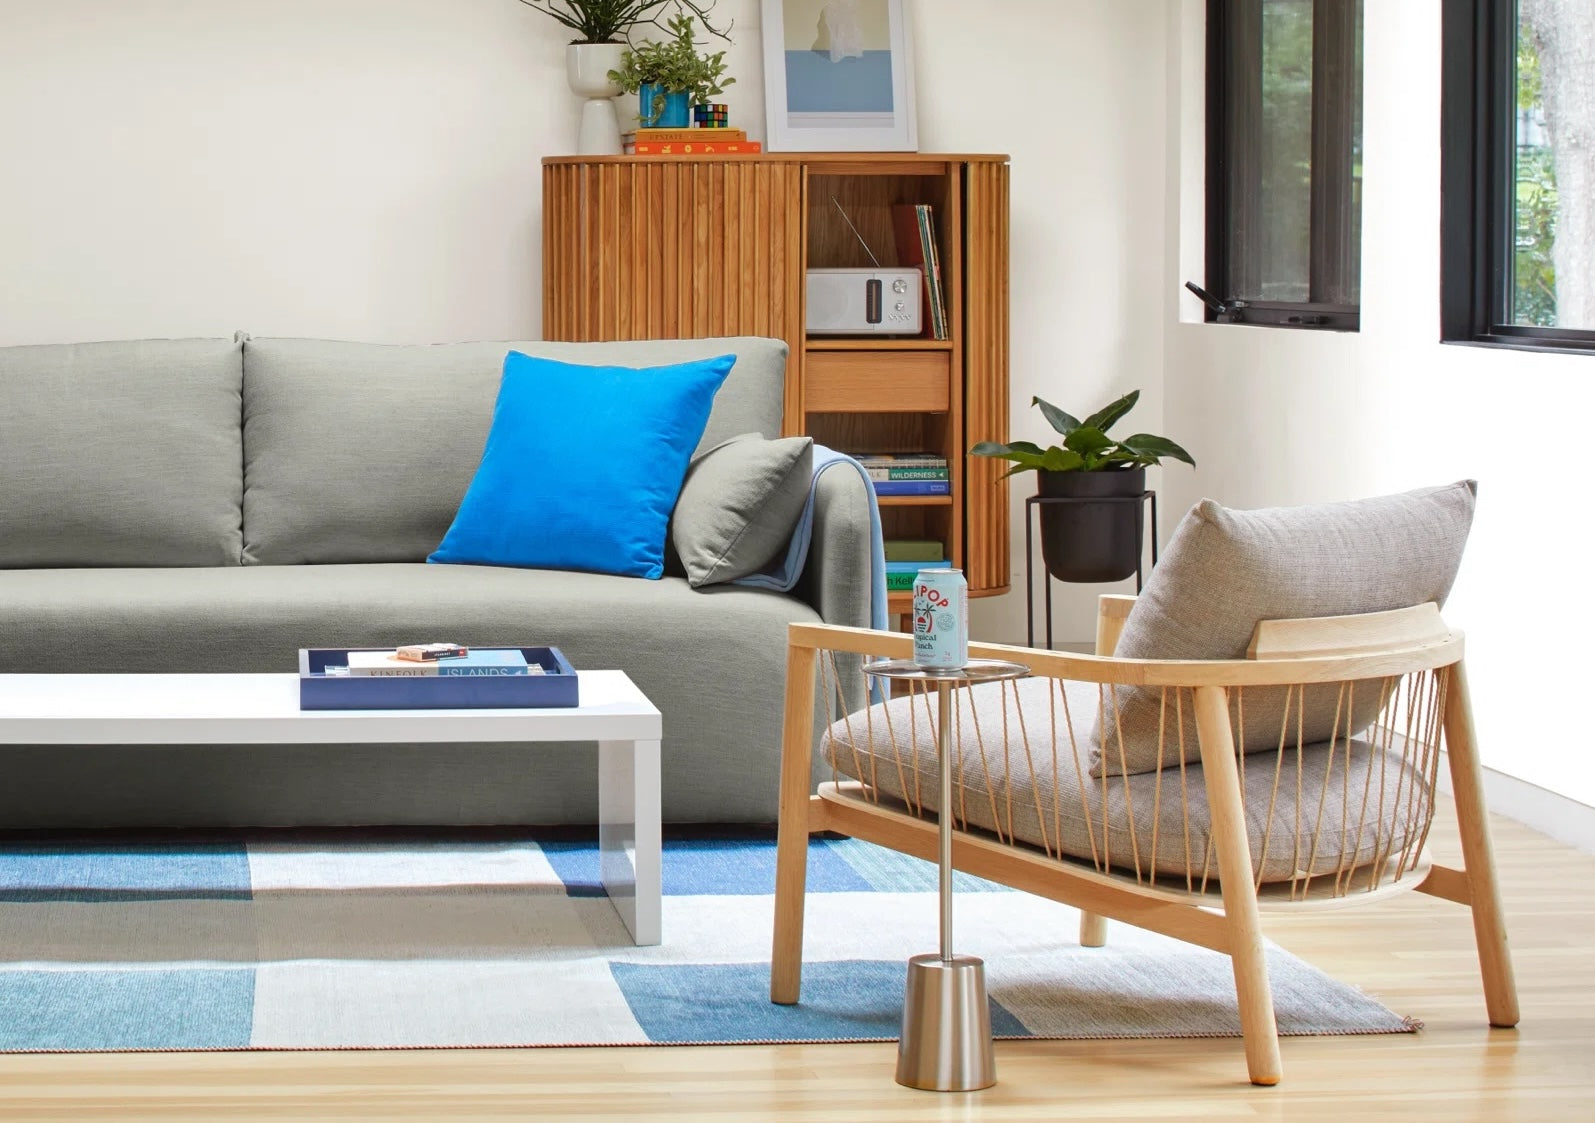 A modern living room with a gray sofa, accented by a blue pillow, and a wooden chair with gray cushions. A white coffee table sits on a blue and white patterned rug. There's a bookshelf in the back containing books and decor, alongside a green potted plant.